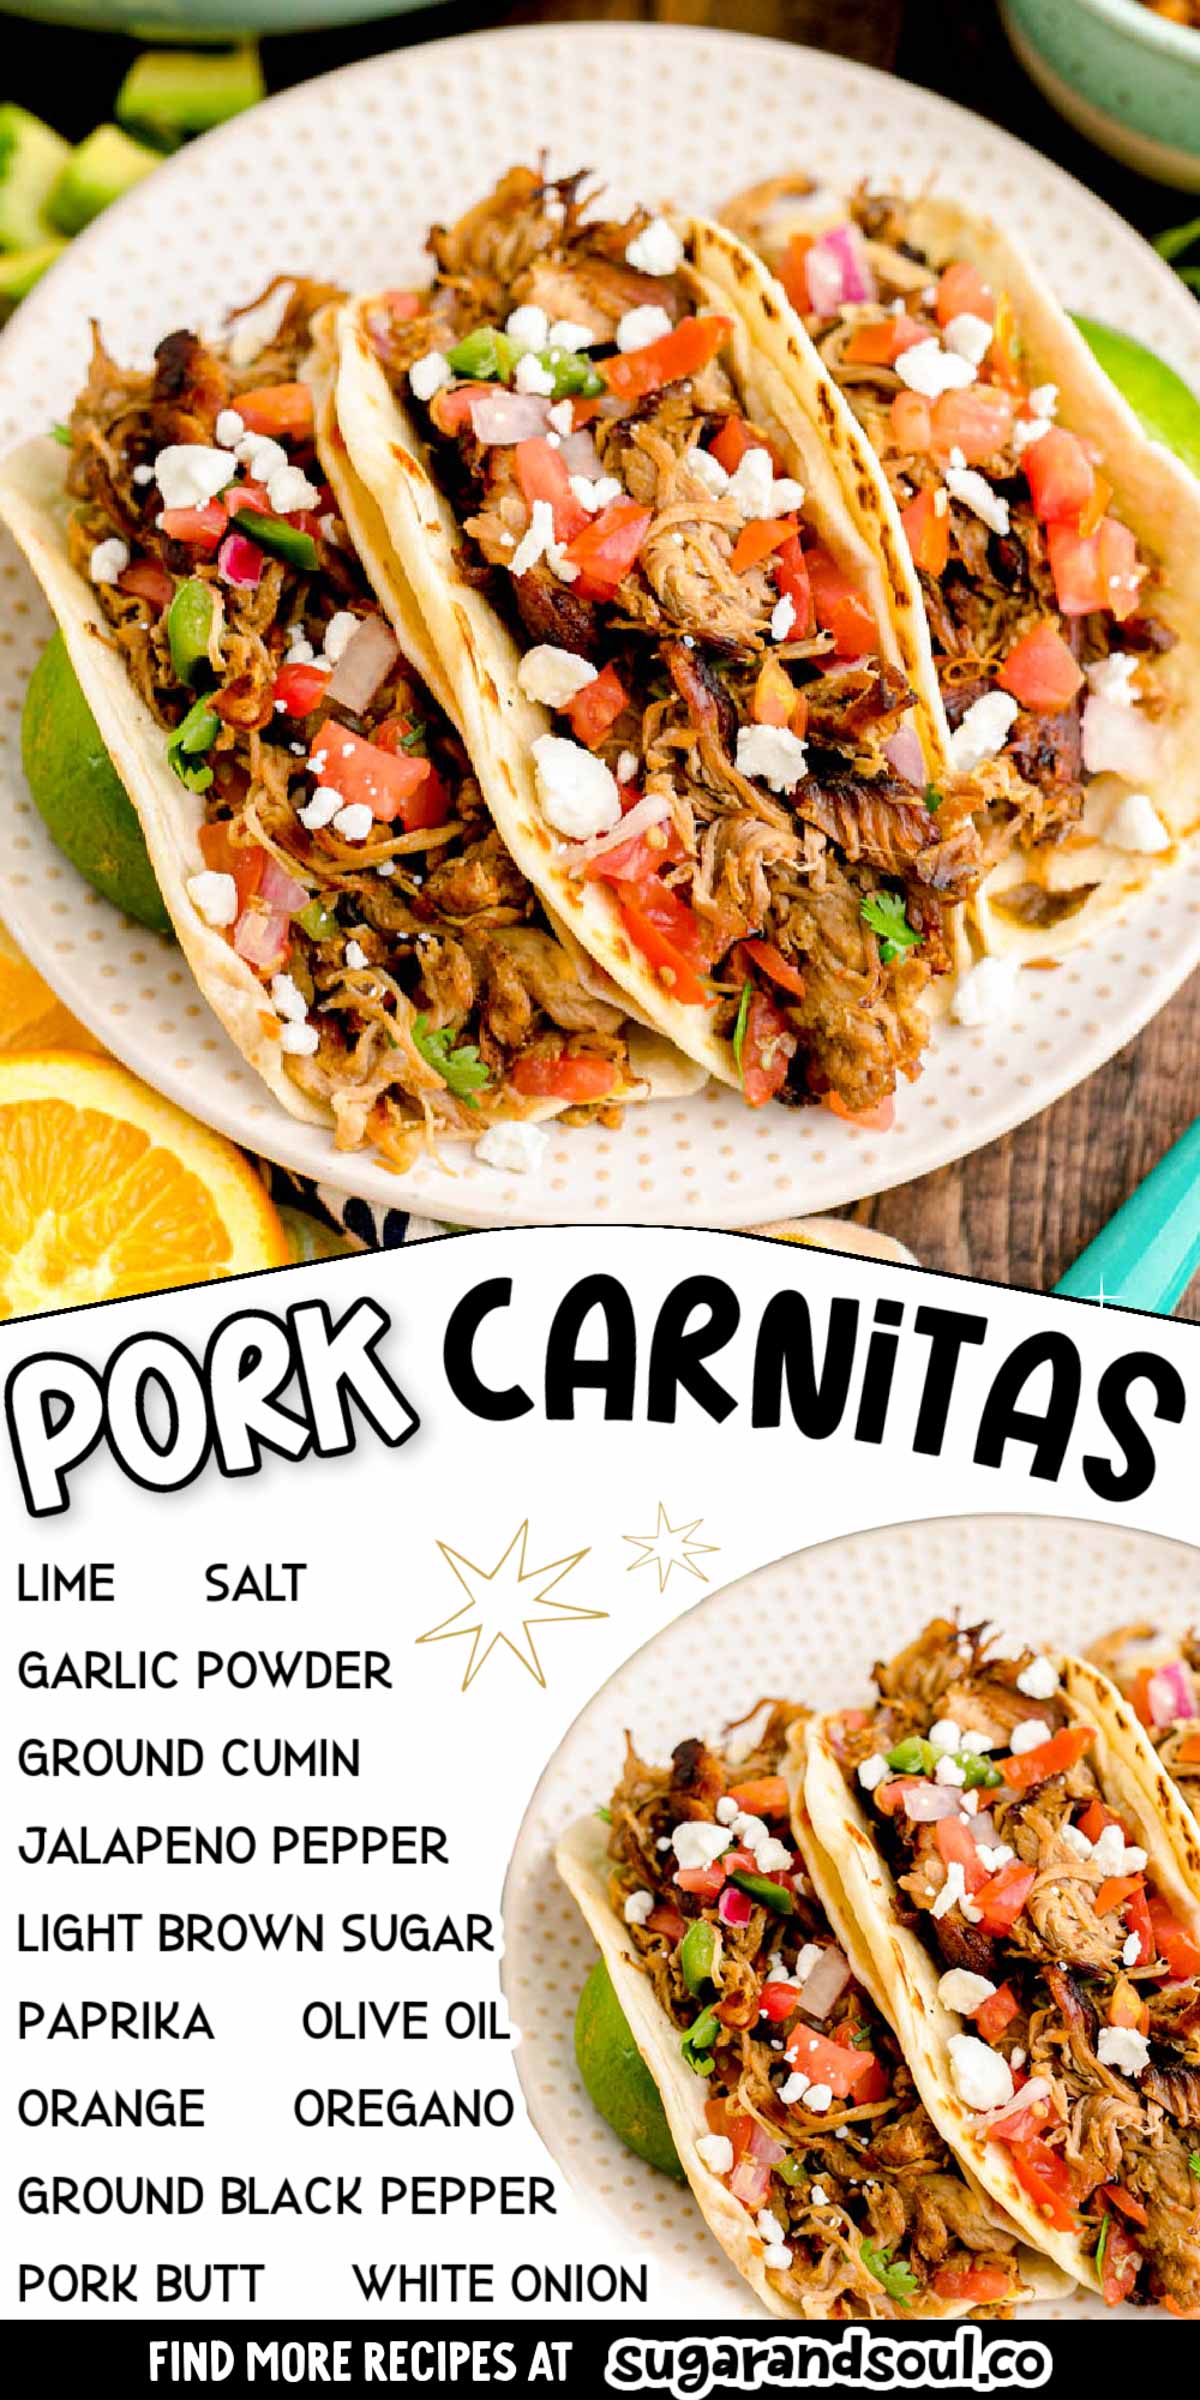 Pork Carnitas has juicy, flavorful meat that gets seasoned with an easy homemade rub before slow cooking to delicious tender perfection! Tuck the finished meat inside tortillas and pile on the toppings to create incredible Pork Tacos that everyone will love! via @sugarandsoulco